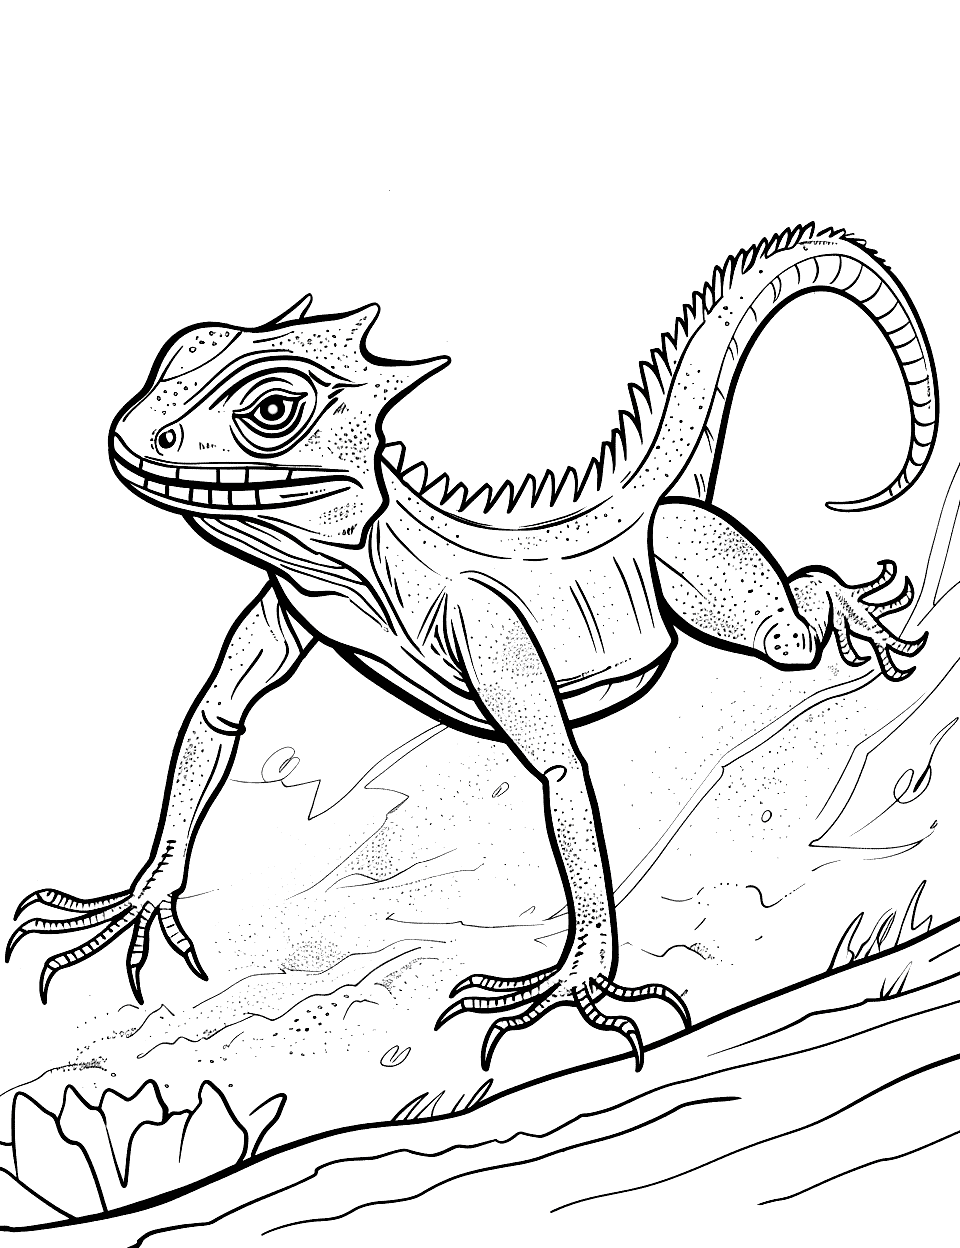 Frilled Lizard Running Coloring Page - A frilled lizard in mid-run across a plain, showing motion.